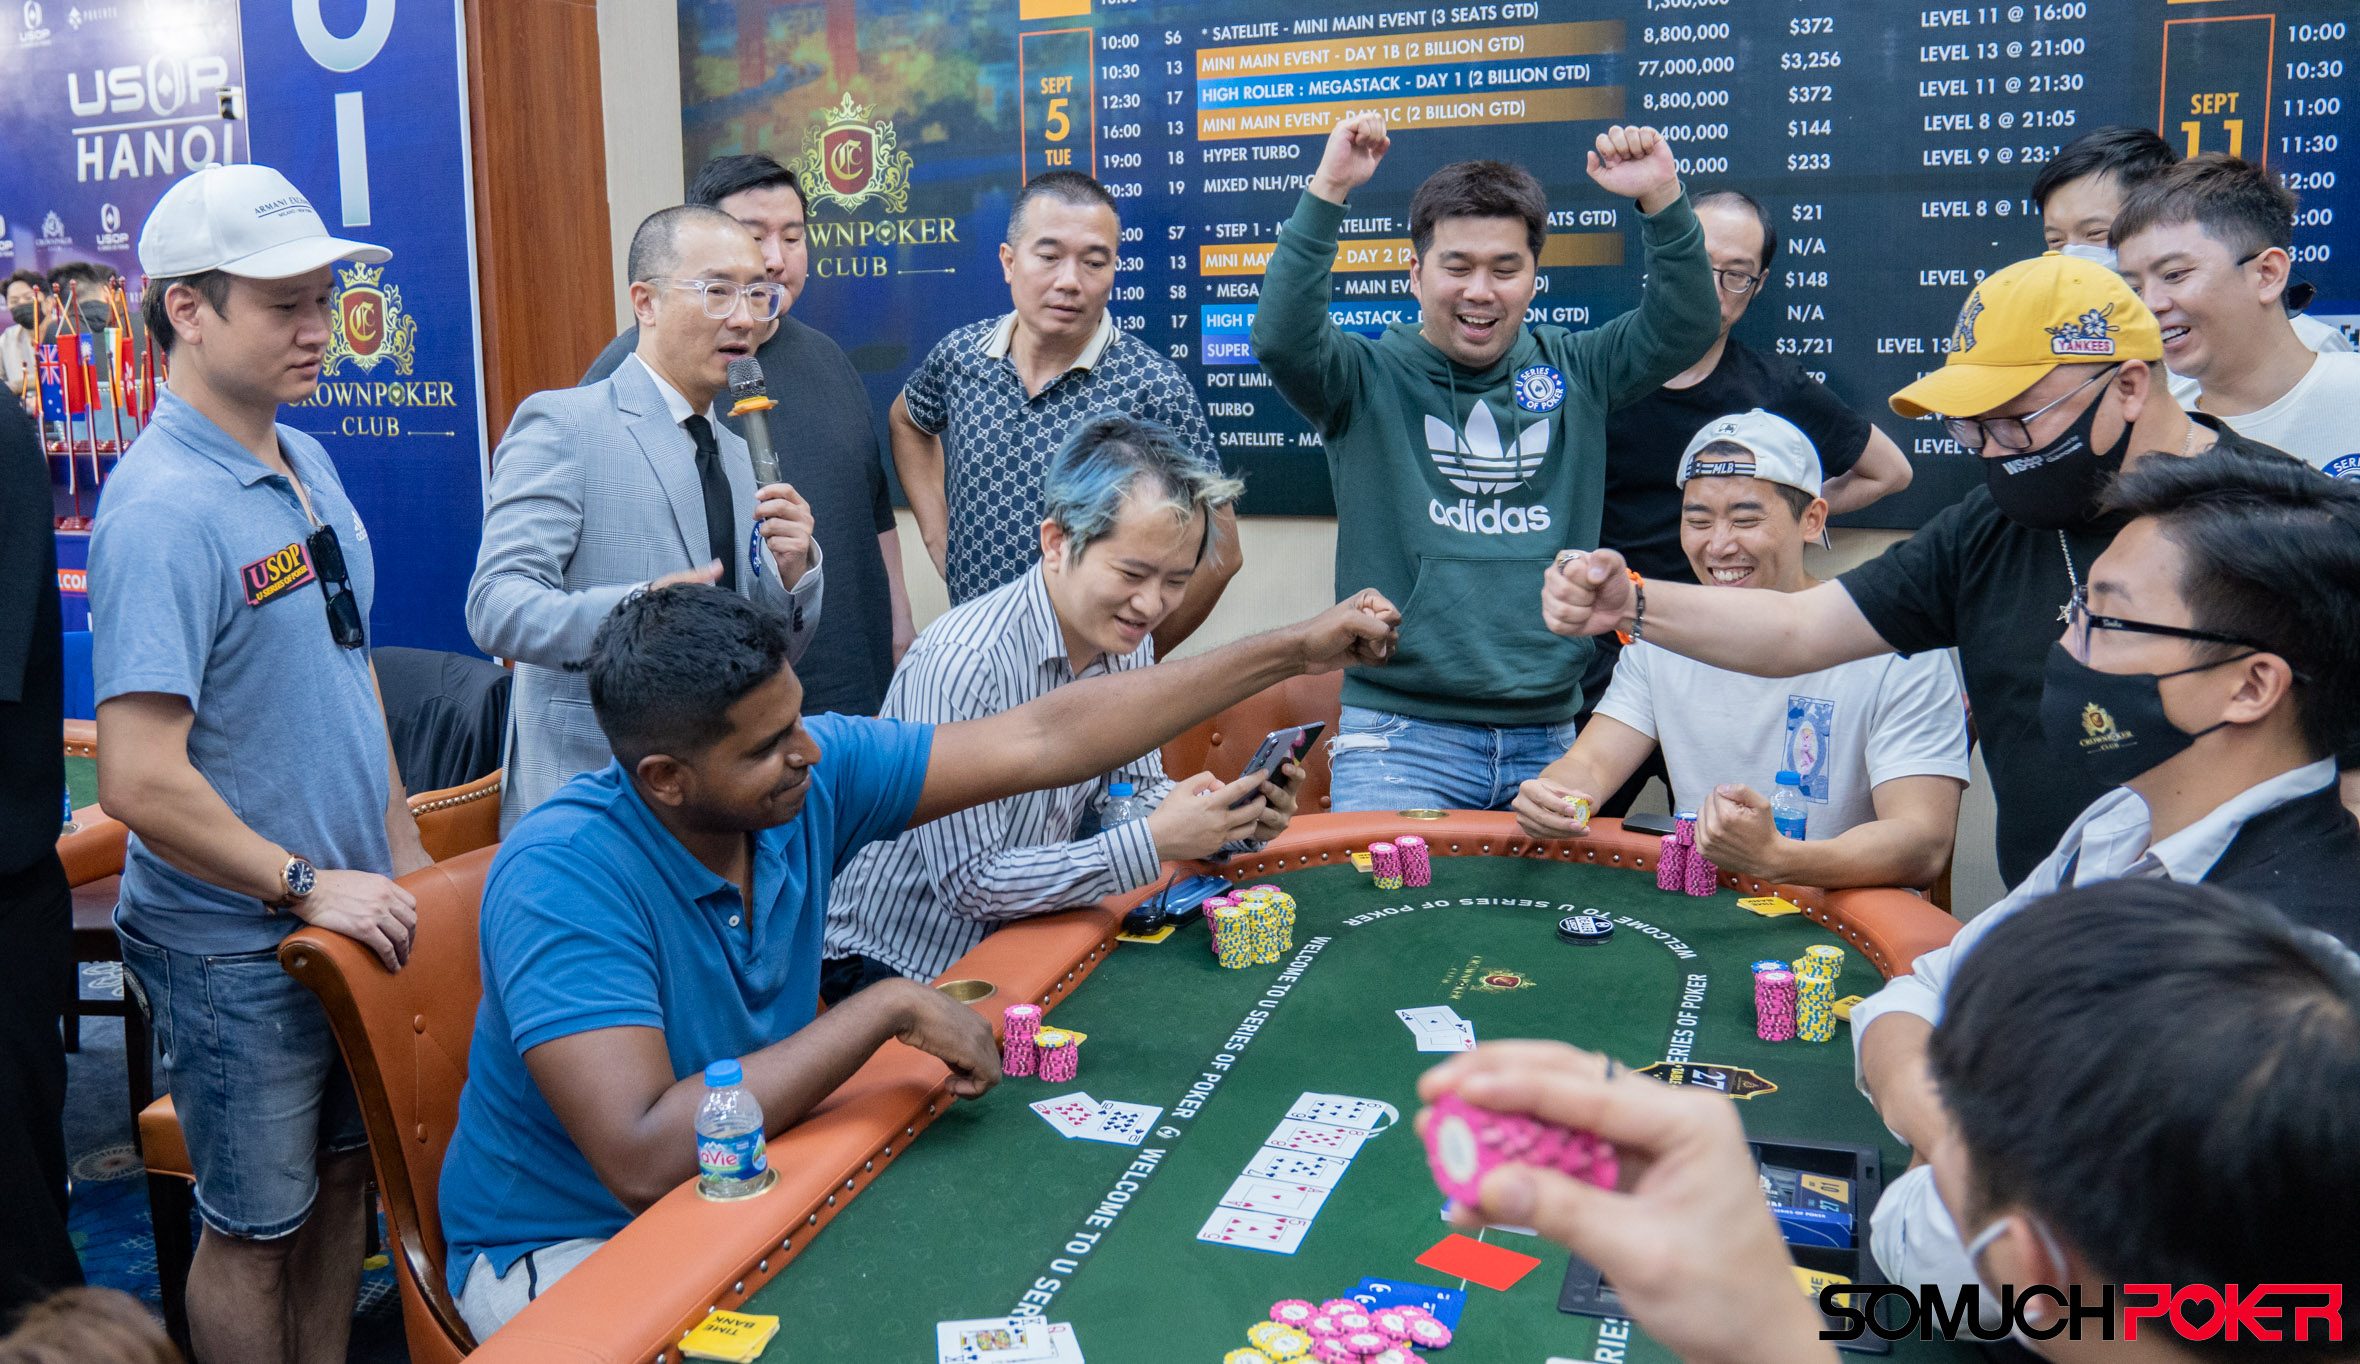 USOP Hanoi on tap: Main Event Day 1B, Heads Up Challenge, Tag Team Event